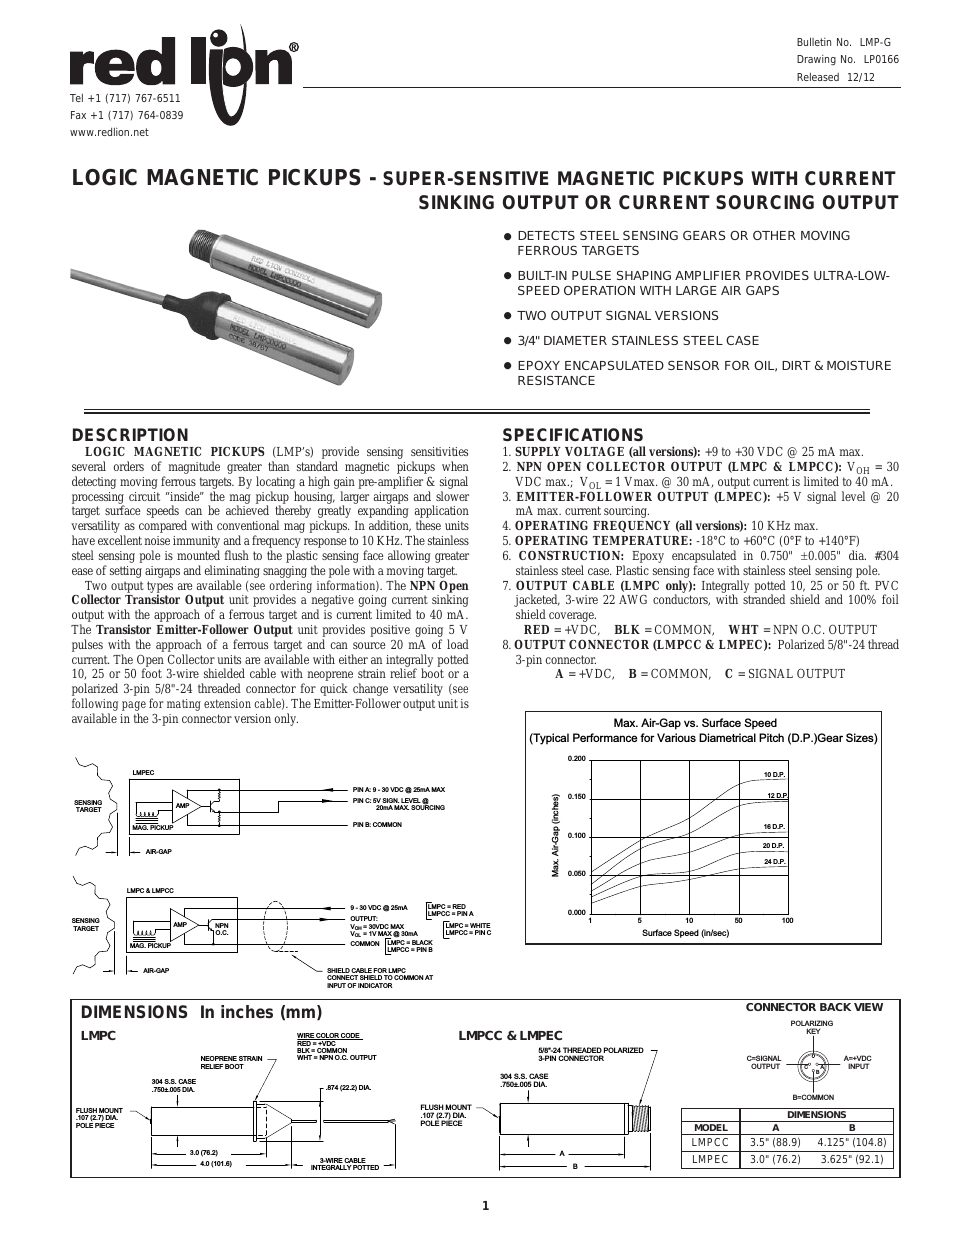 LMPC-AMPLIFIED MAGNETIC PICKUP